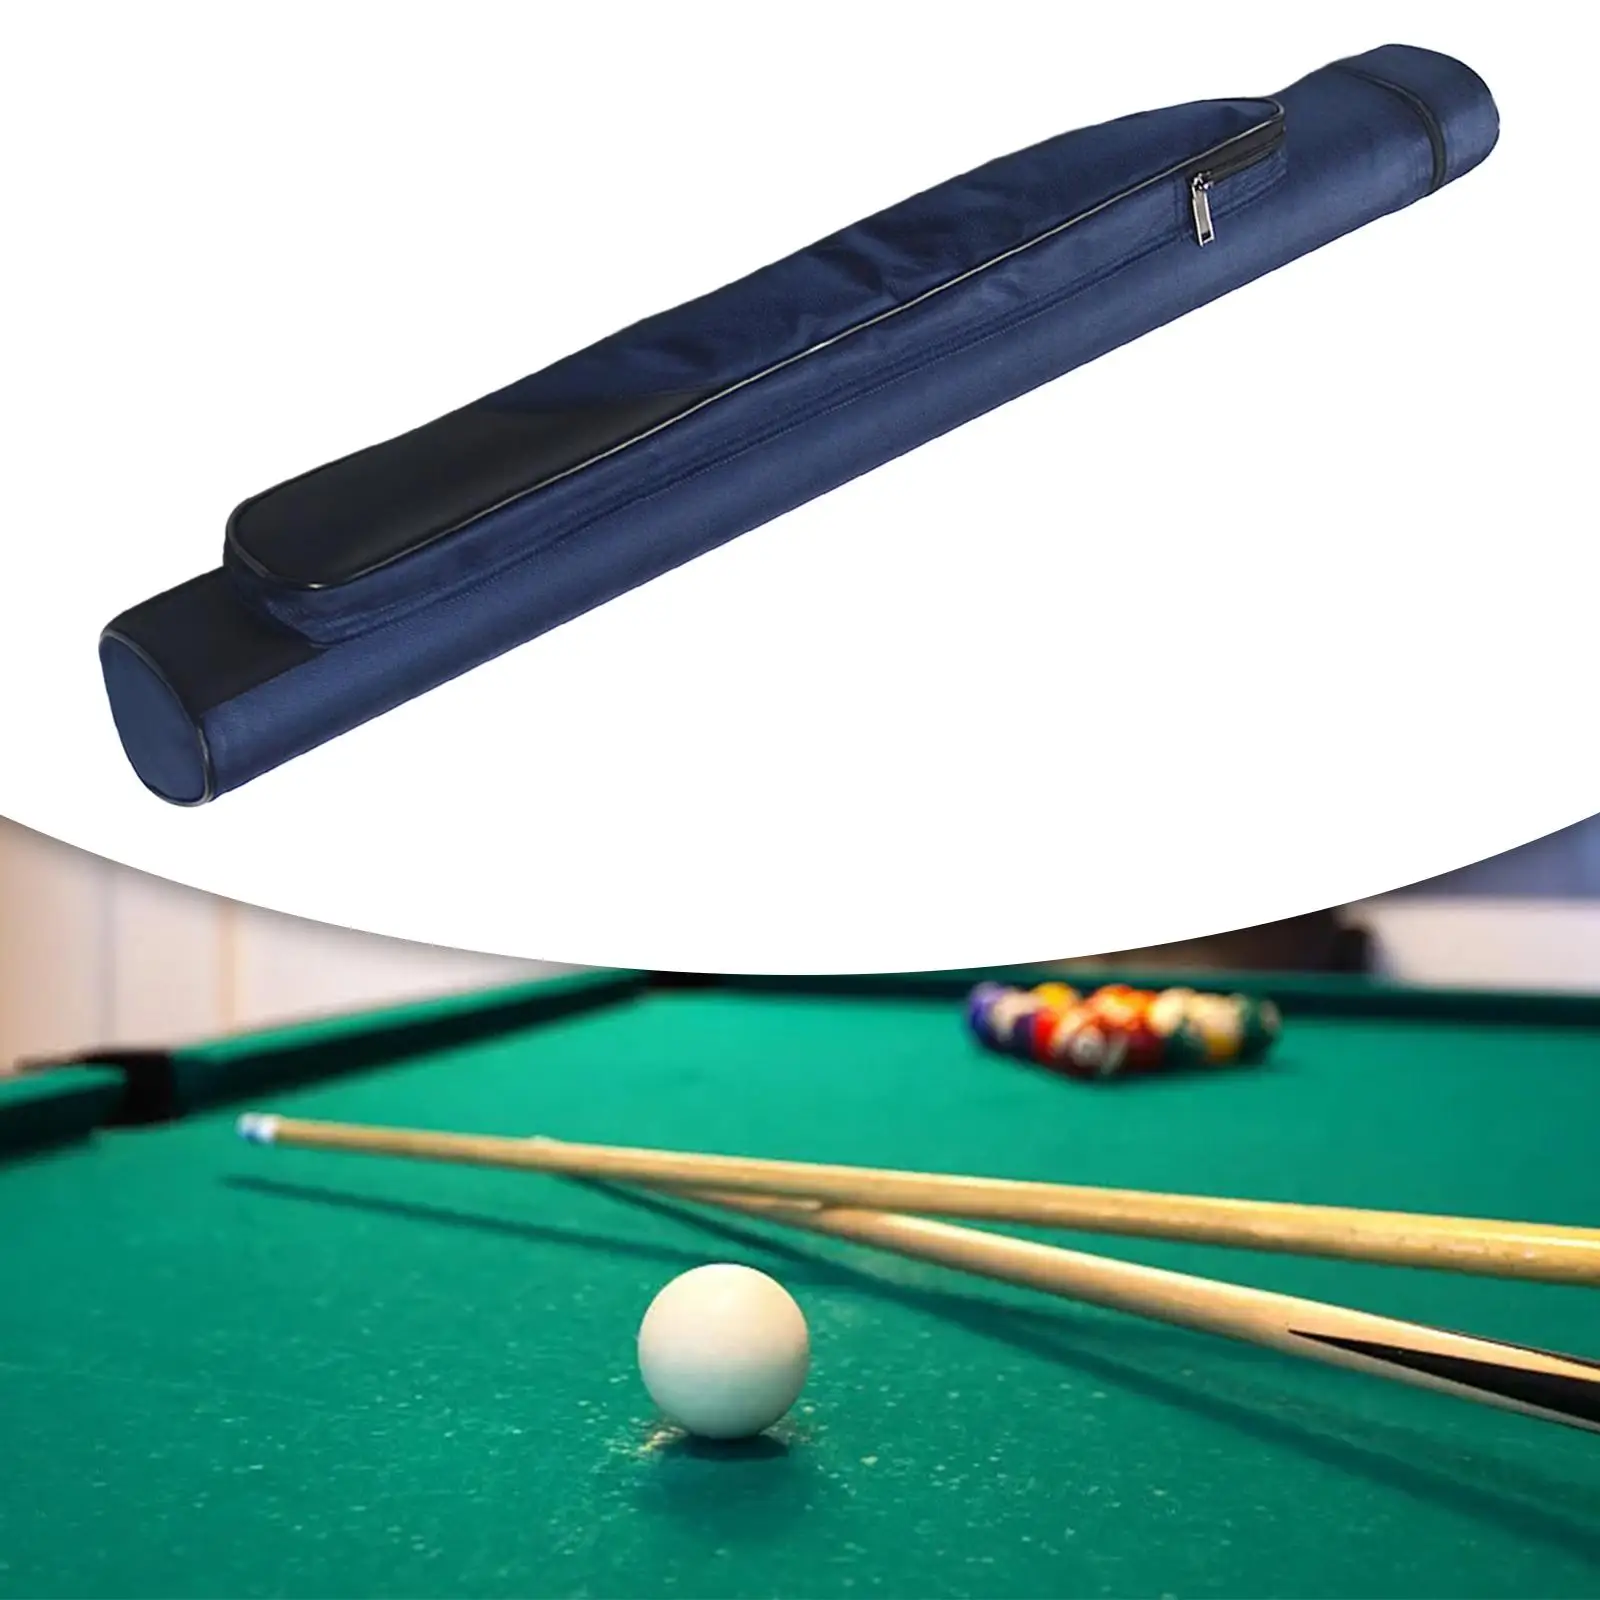 Pool Cue Cases Billiard Pool Cue Carrying Bag, with Adjustable Shoulder Strap